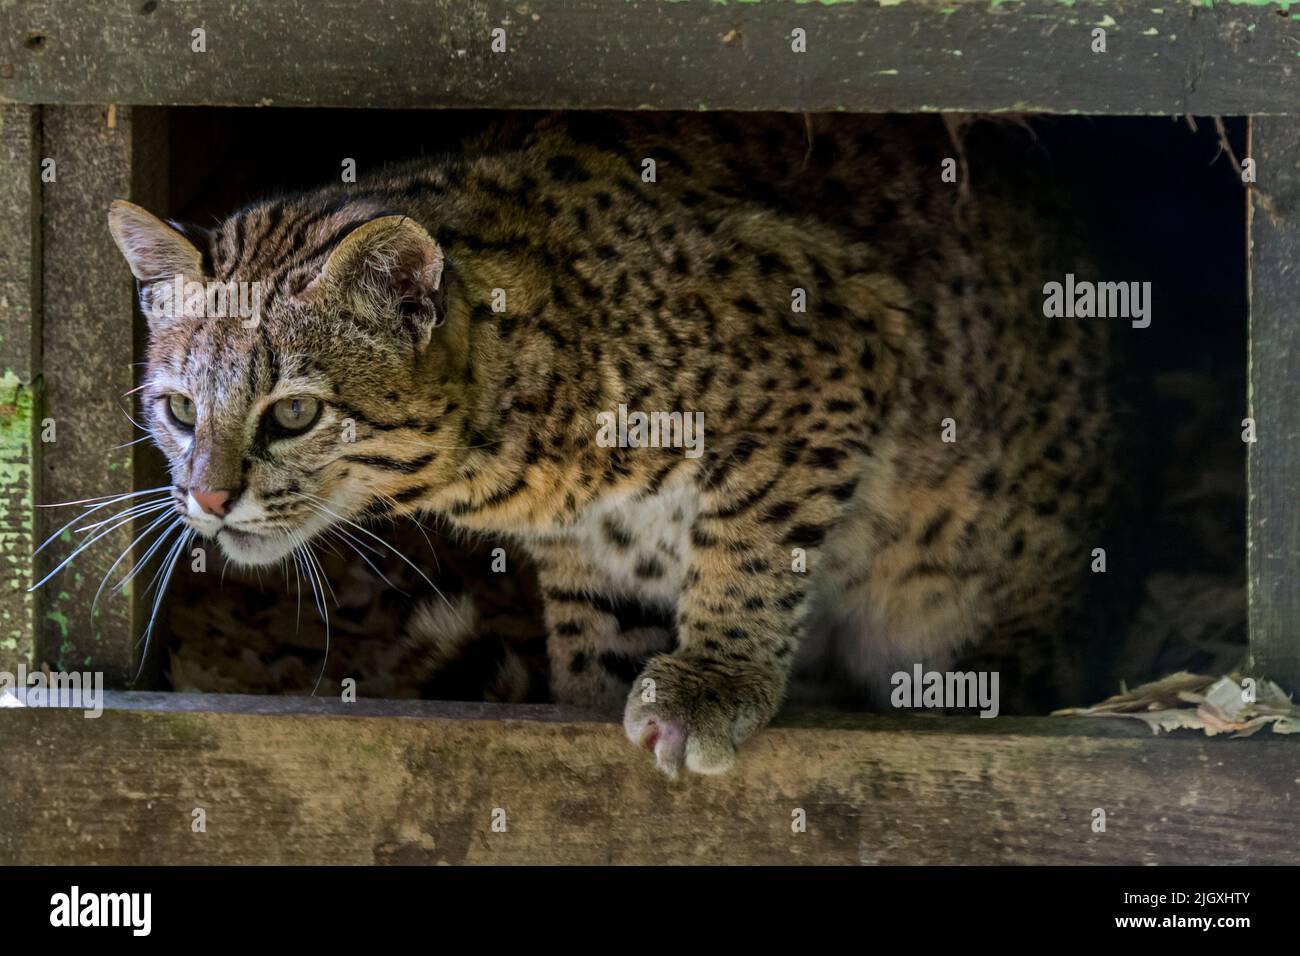 Geoffroy's cat (Leopardus geoffroyi / Oncifelis geoffroyi), native to southern and central South America, in enclosure at zoo Parc des Félins, France Stock Photo